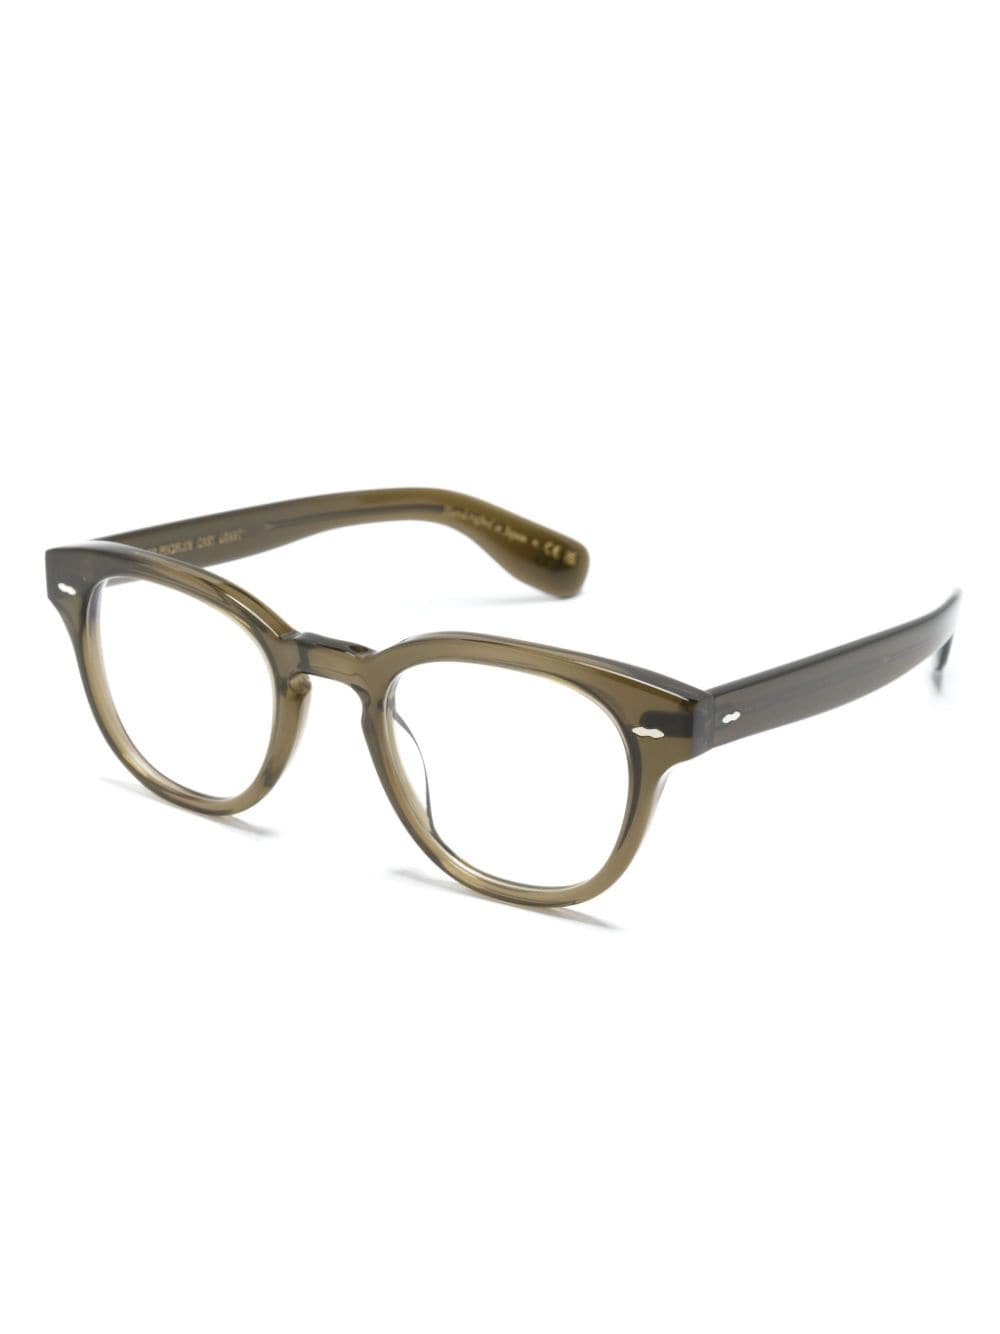 Oliver Peoples Cary Grant round-frame glasses - Bruin